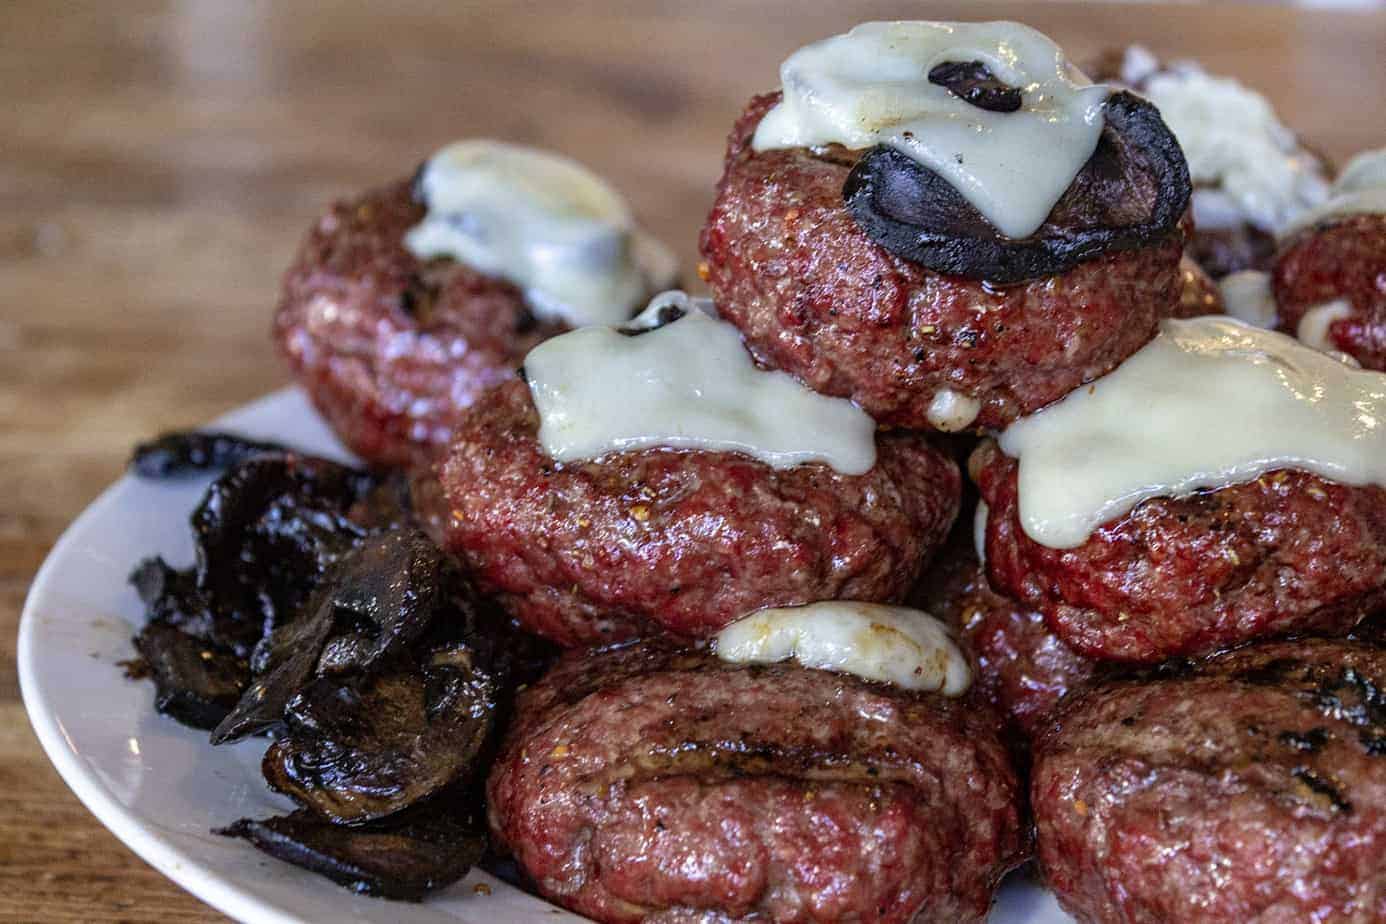 A pile of smoked juicy lucy hamburgers topped with provolone cheese and sitting next to some cooked mushrooms.